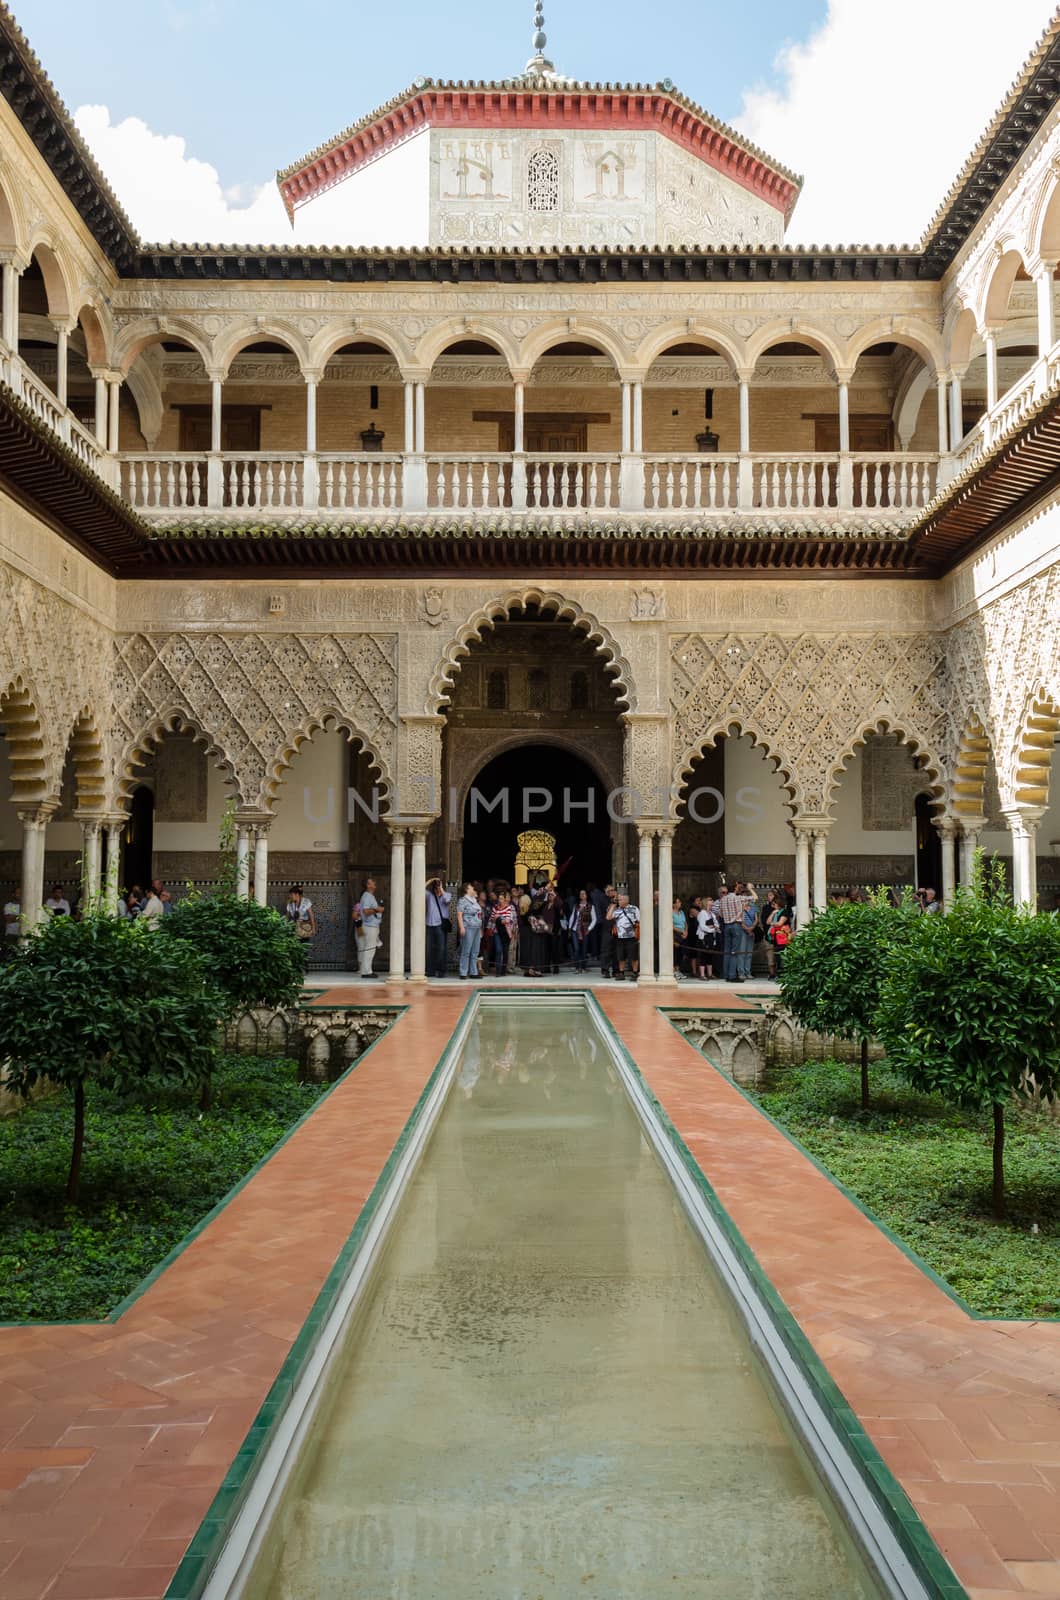 The name, meaning The Courtyard of the Maidens , refers to the legend that the Moors demanded 100 virgins every year as tribute from Christian kingdoms in Iberia. Alcazar of Sevilla, Spain